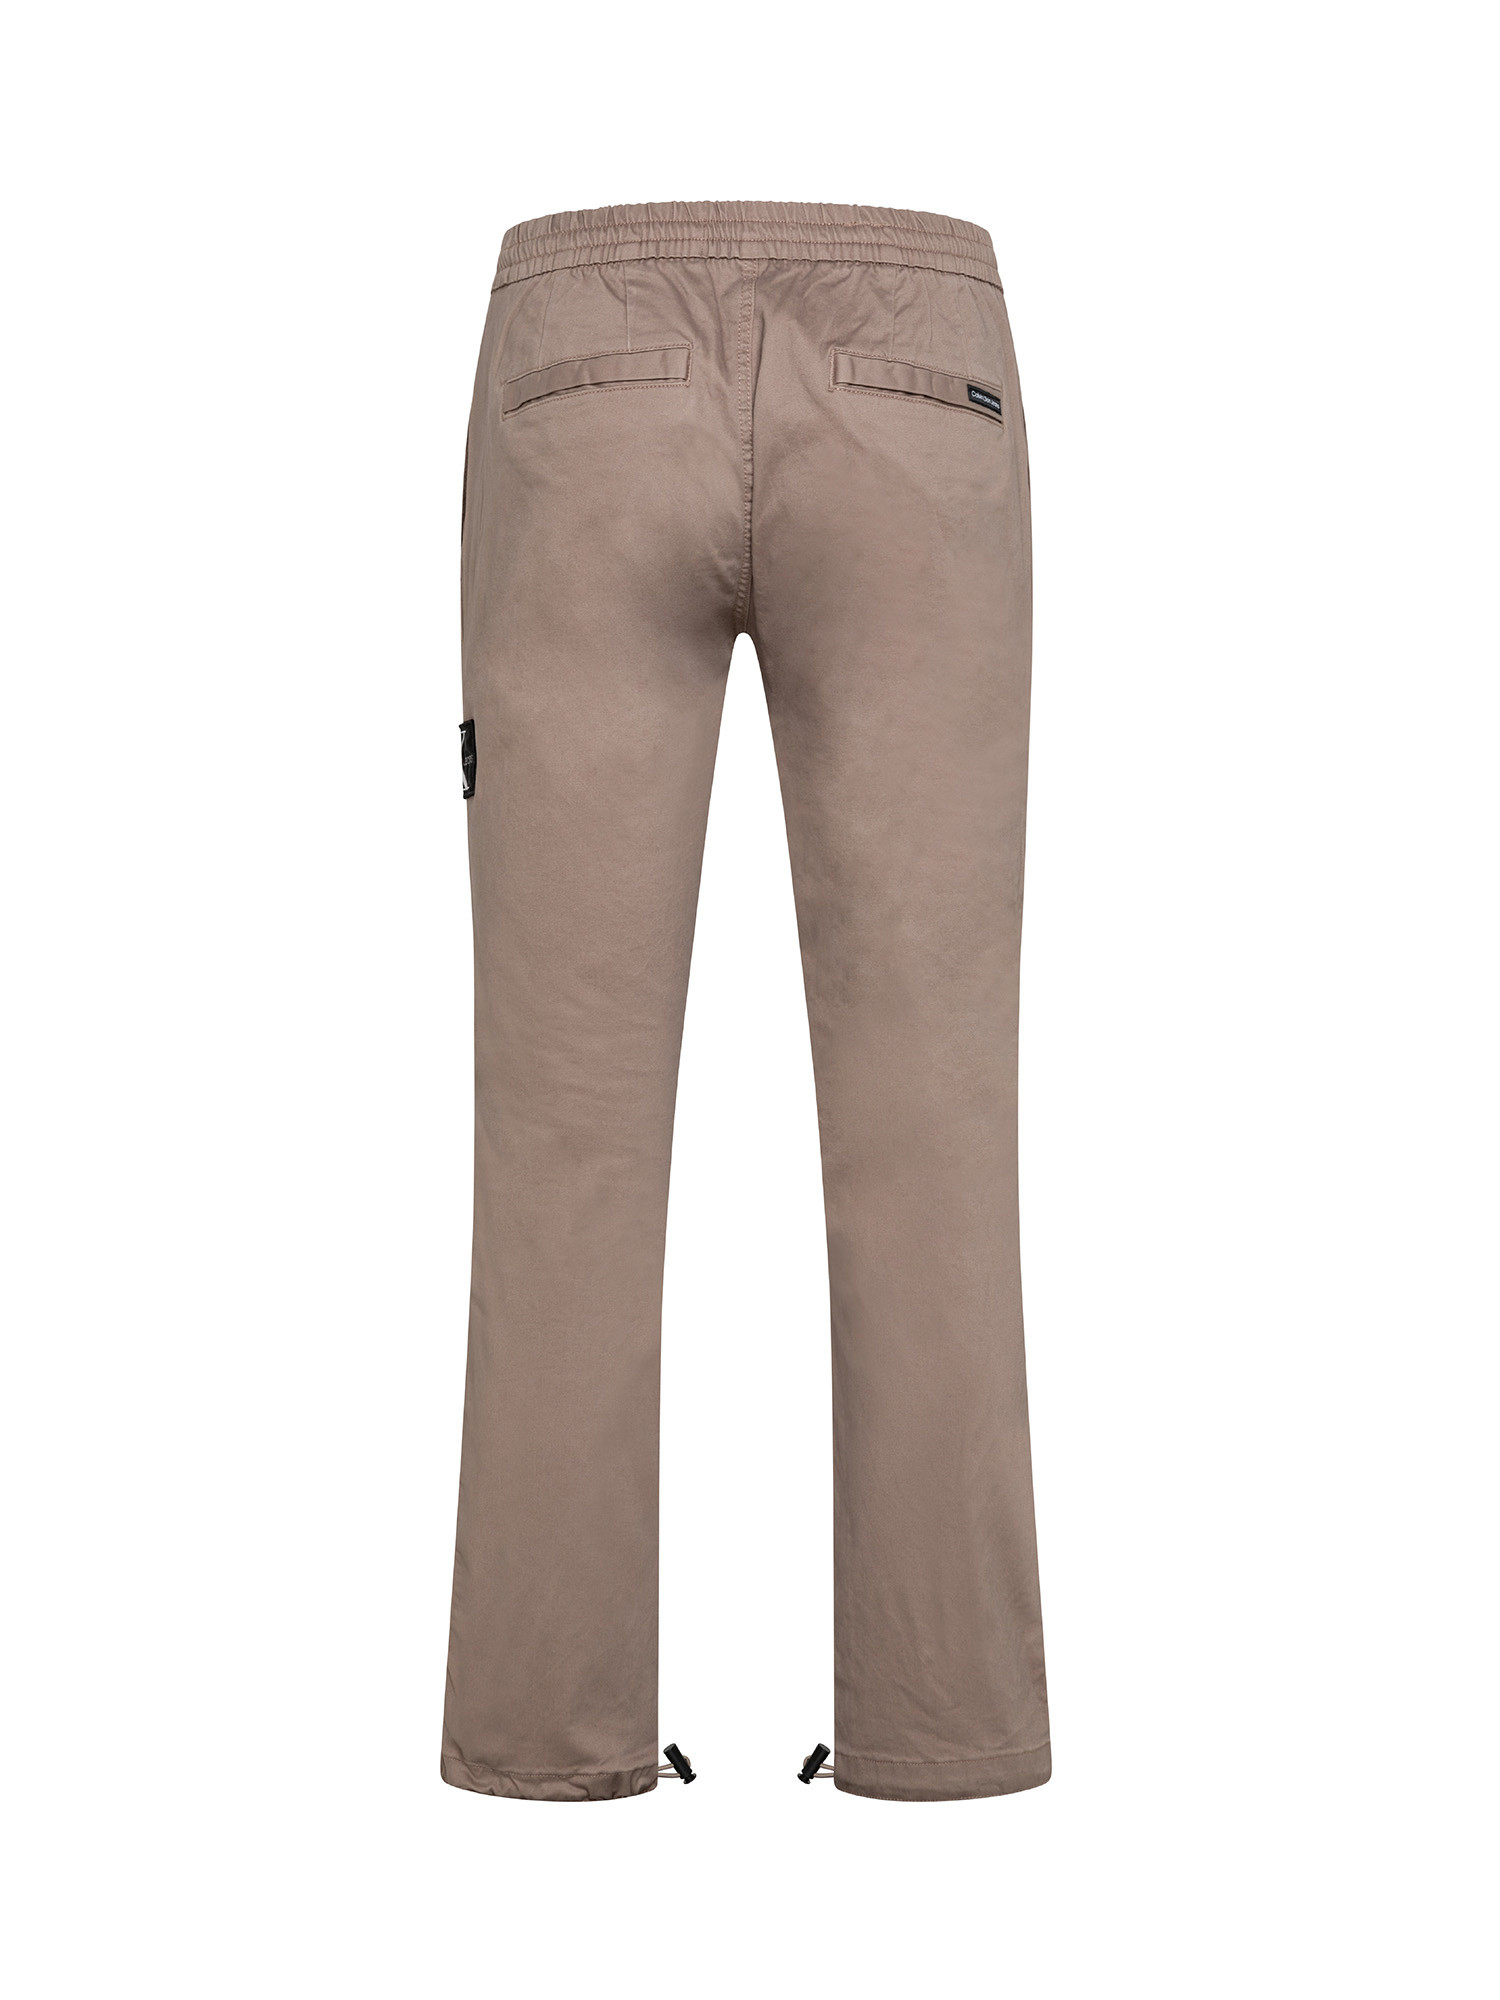 Trousers, Beige, large image number 1